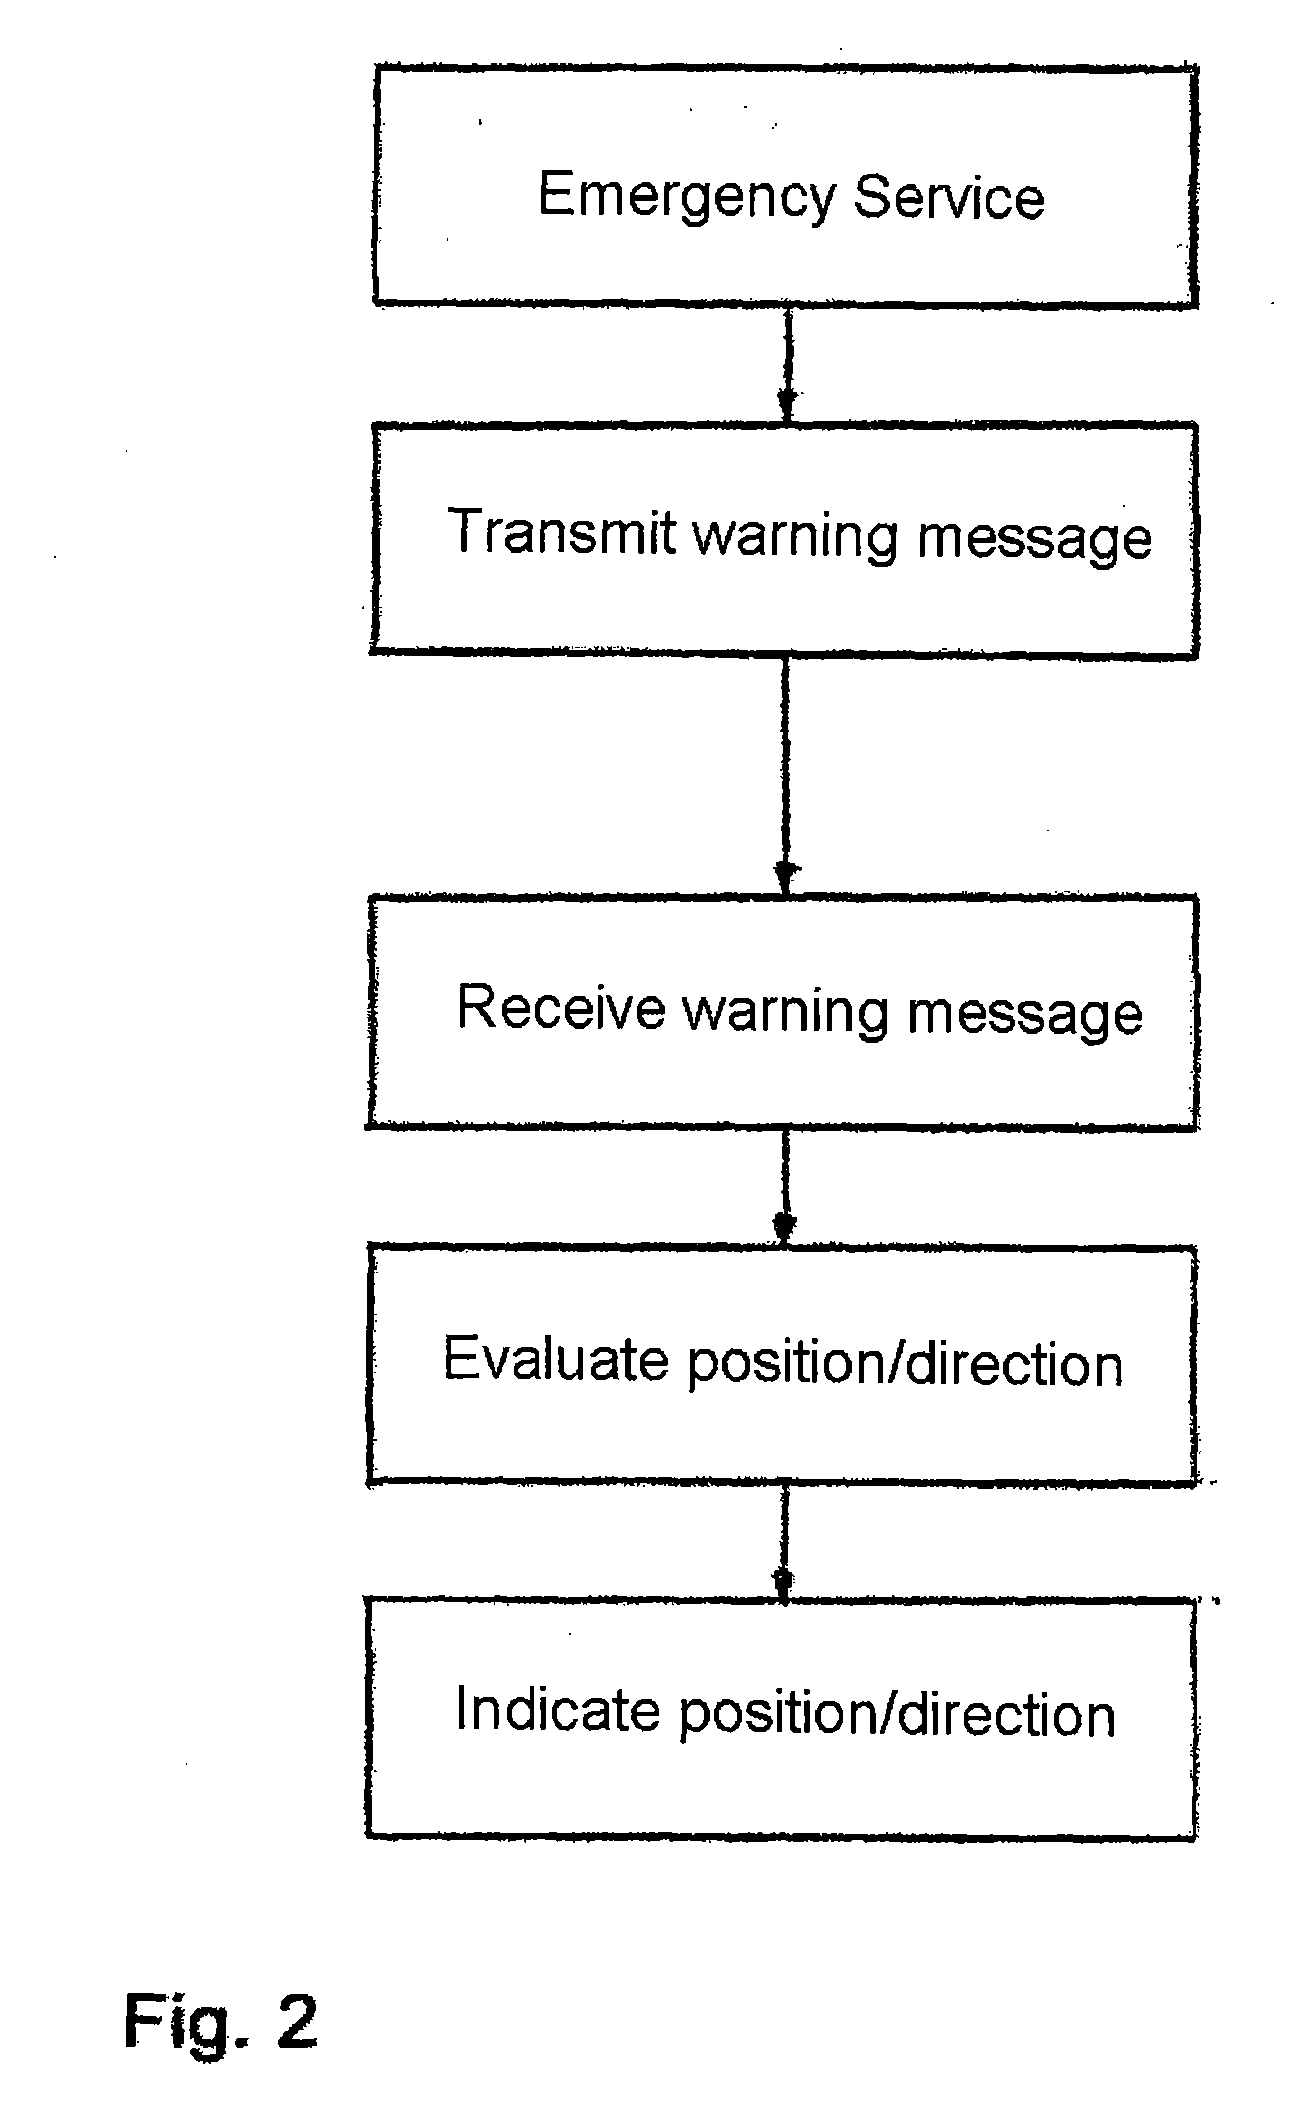 Method and apparatus for warning of emergency vehicles in emergency service